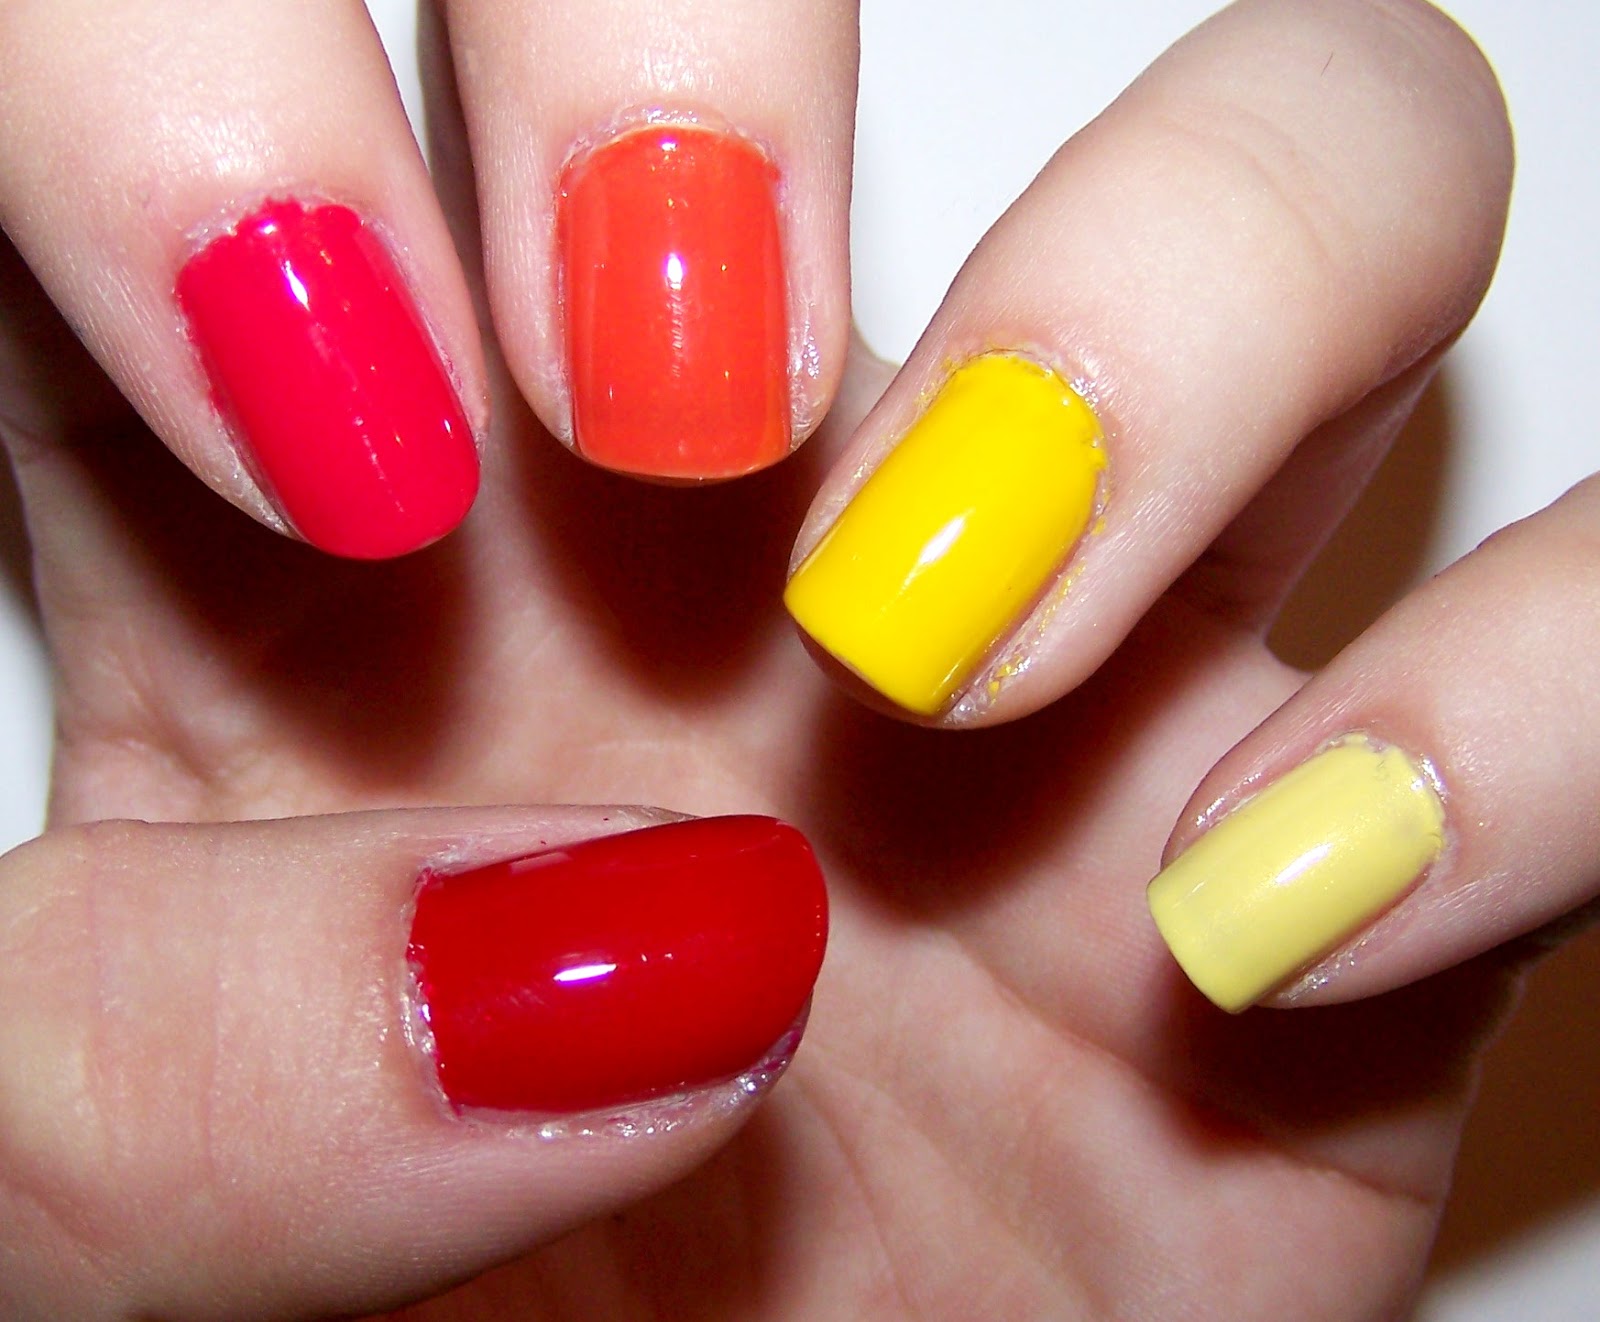 2. Sunset Ombre Nails Step by Step - wide 3